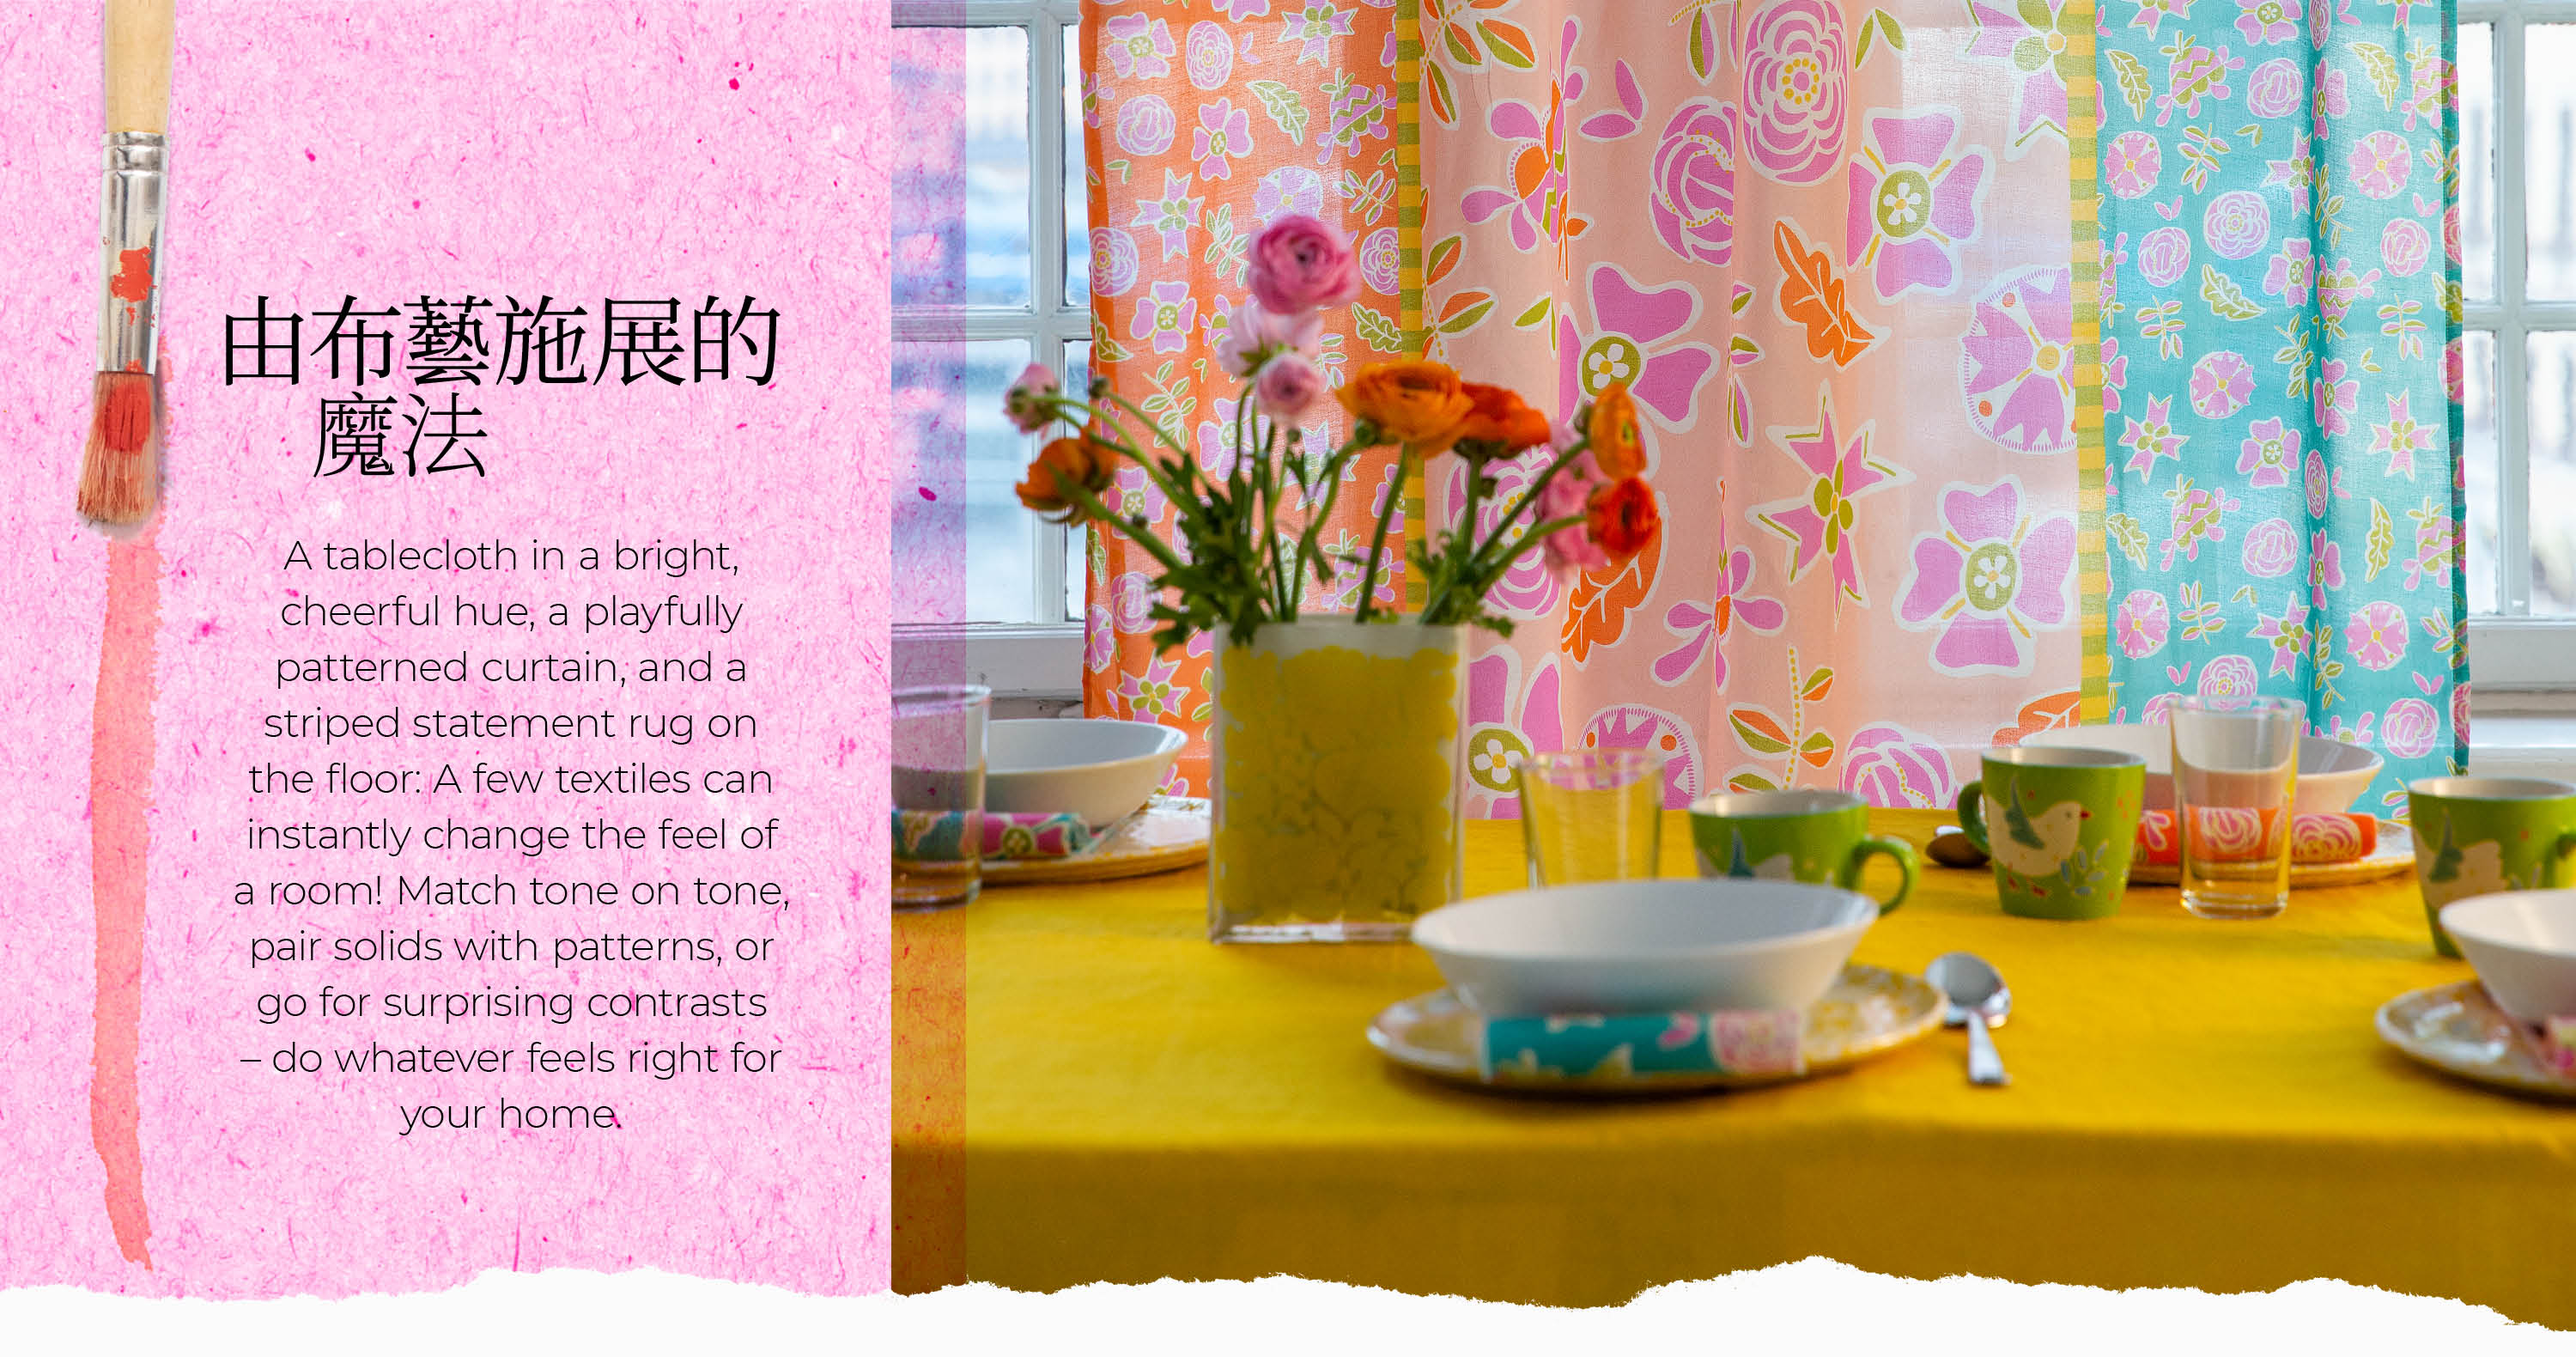 A tablecloth in a bright, cheerful hue.